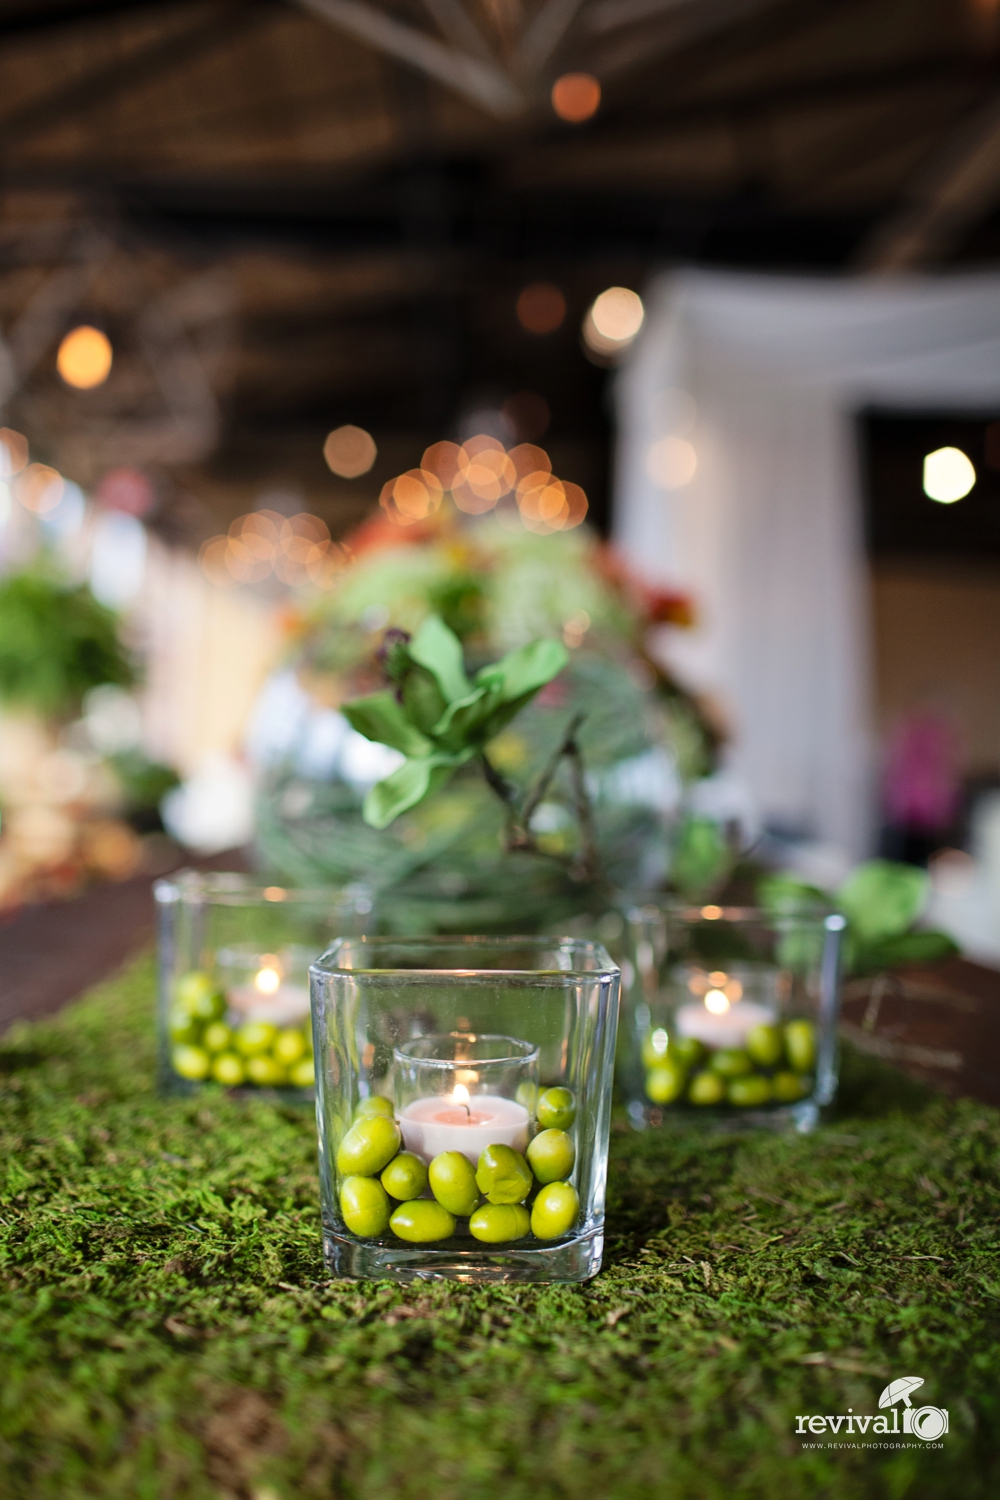 Centerpieces for weddings earthy green centerpieces Photo by Revival Photography www.revivalphotography.com